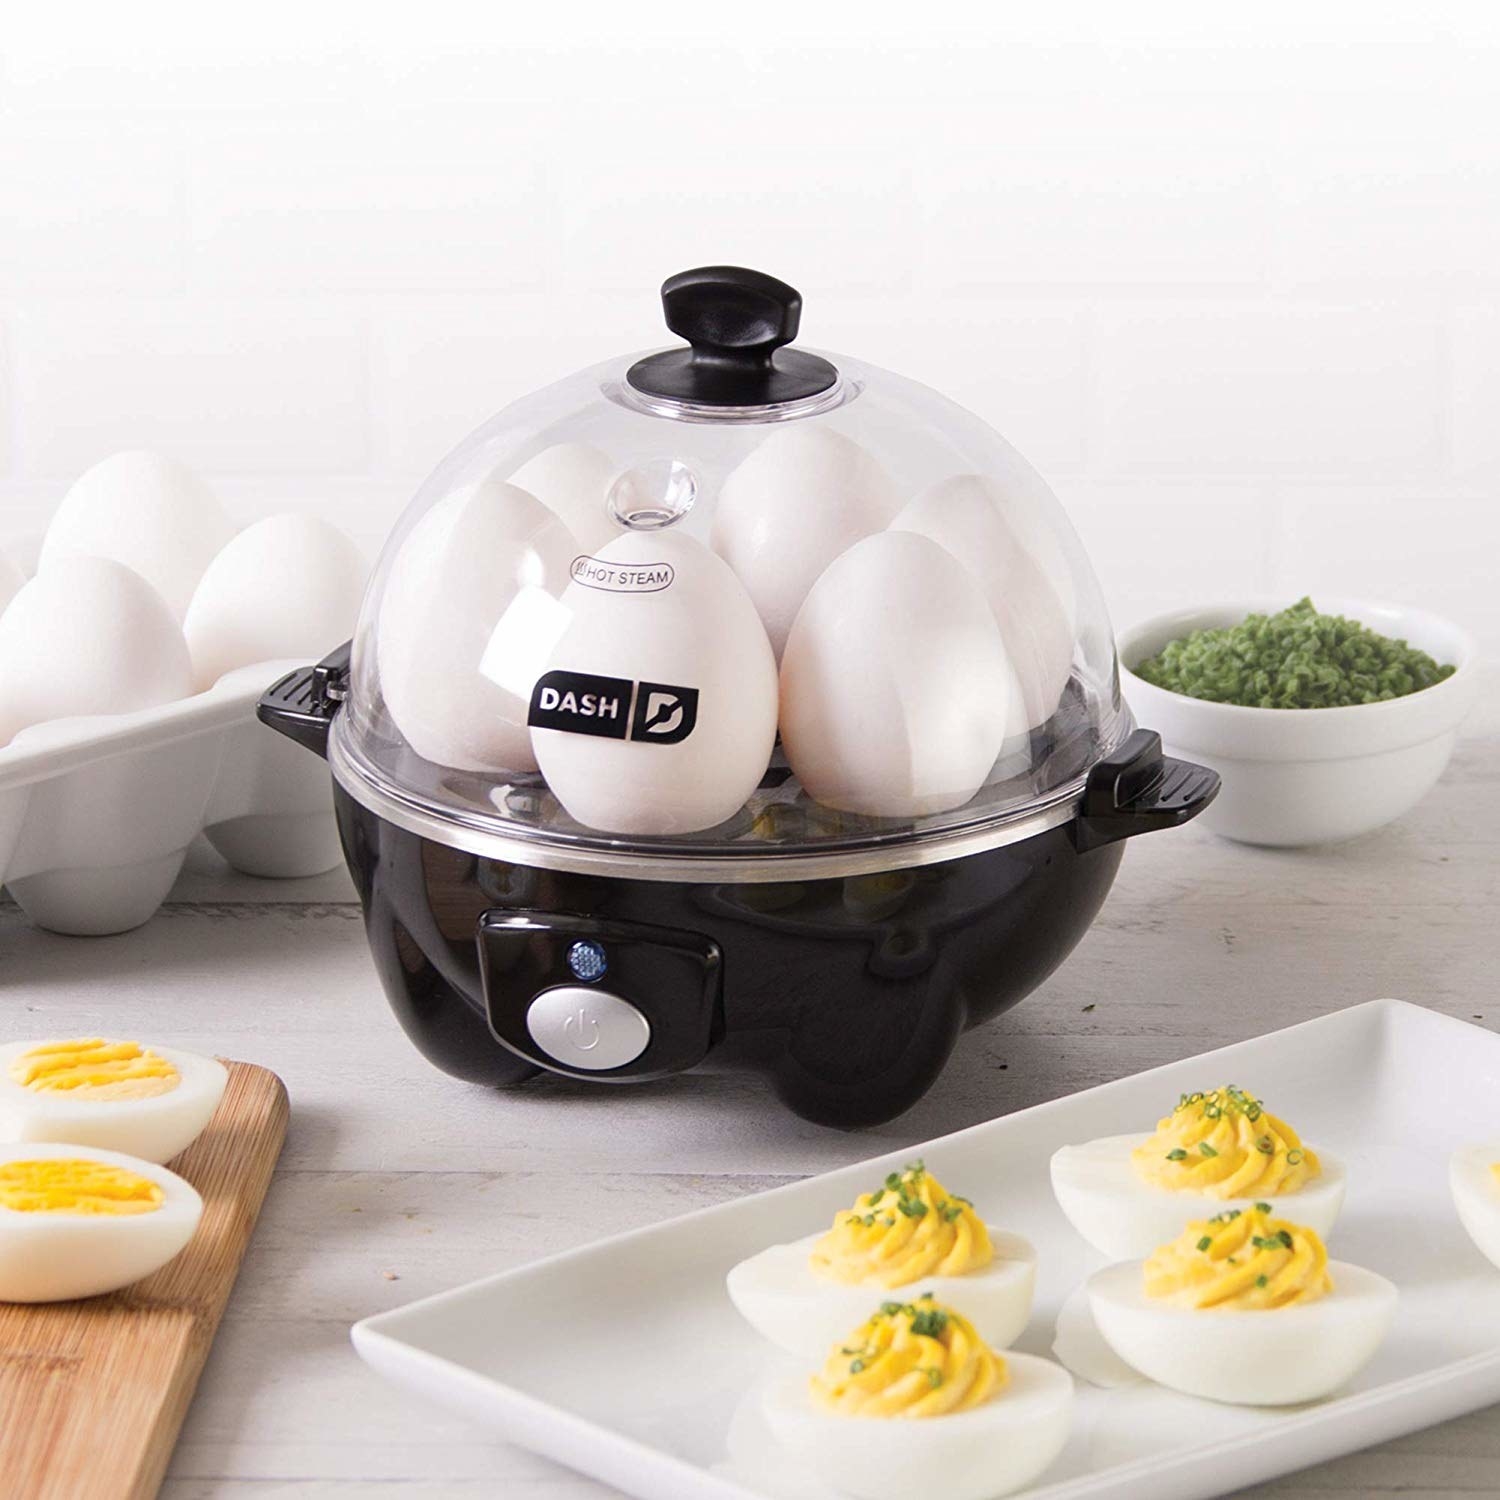 The egg cooker that holds six eggs and has a dome cover